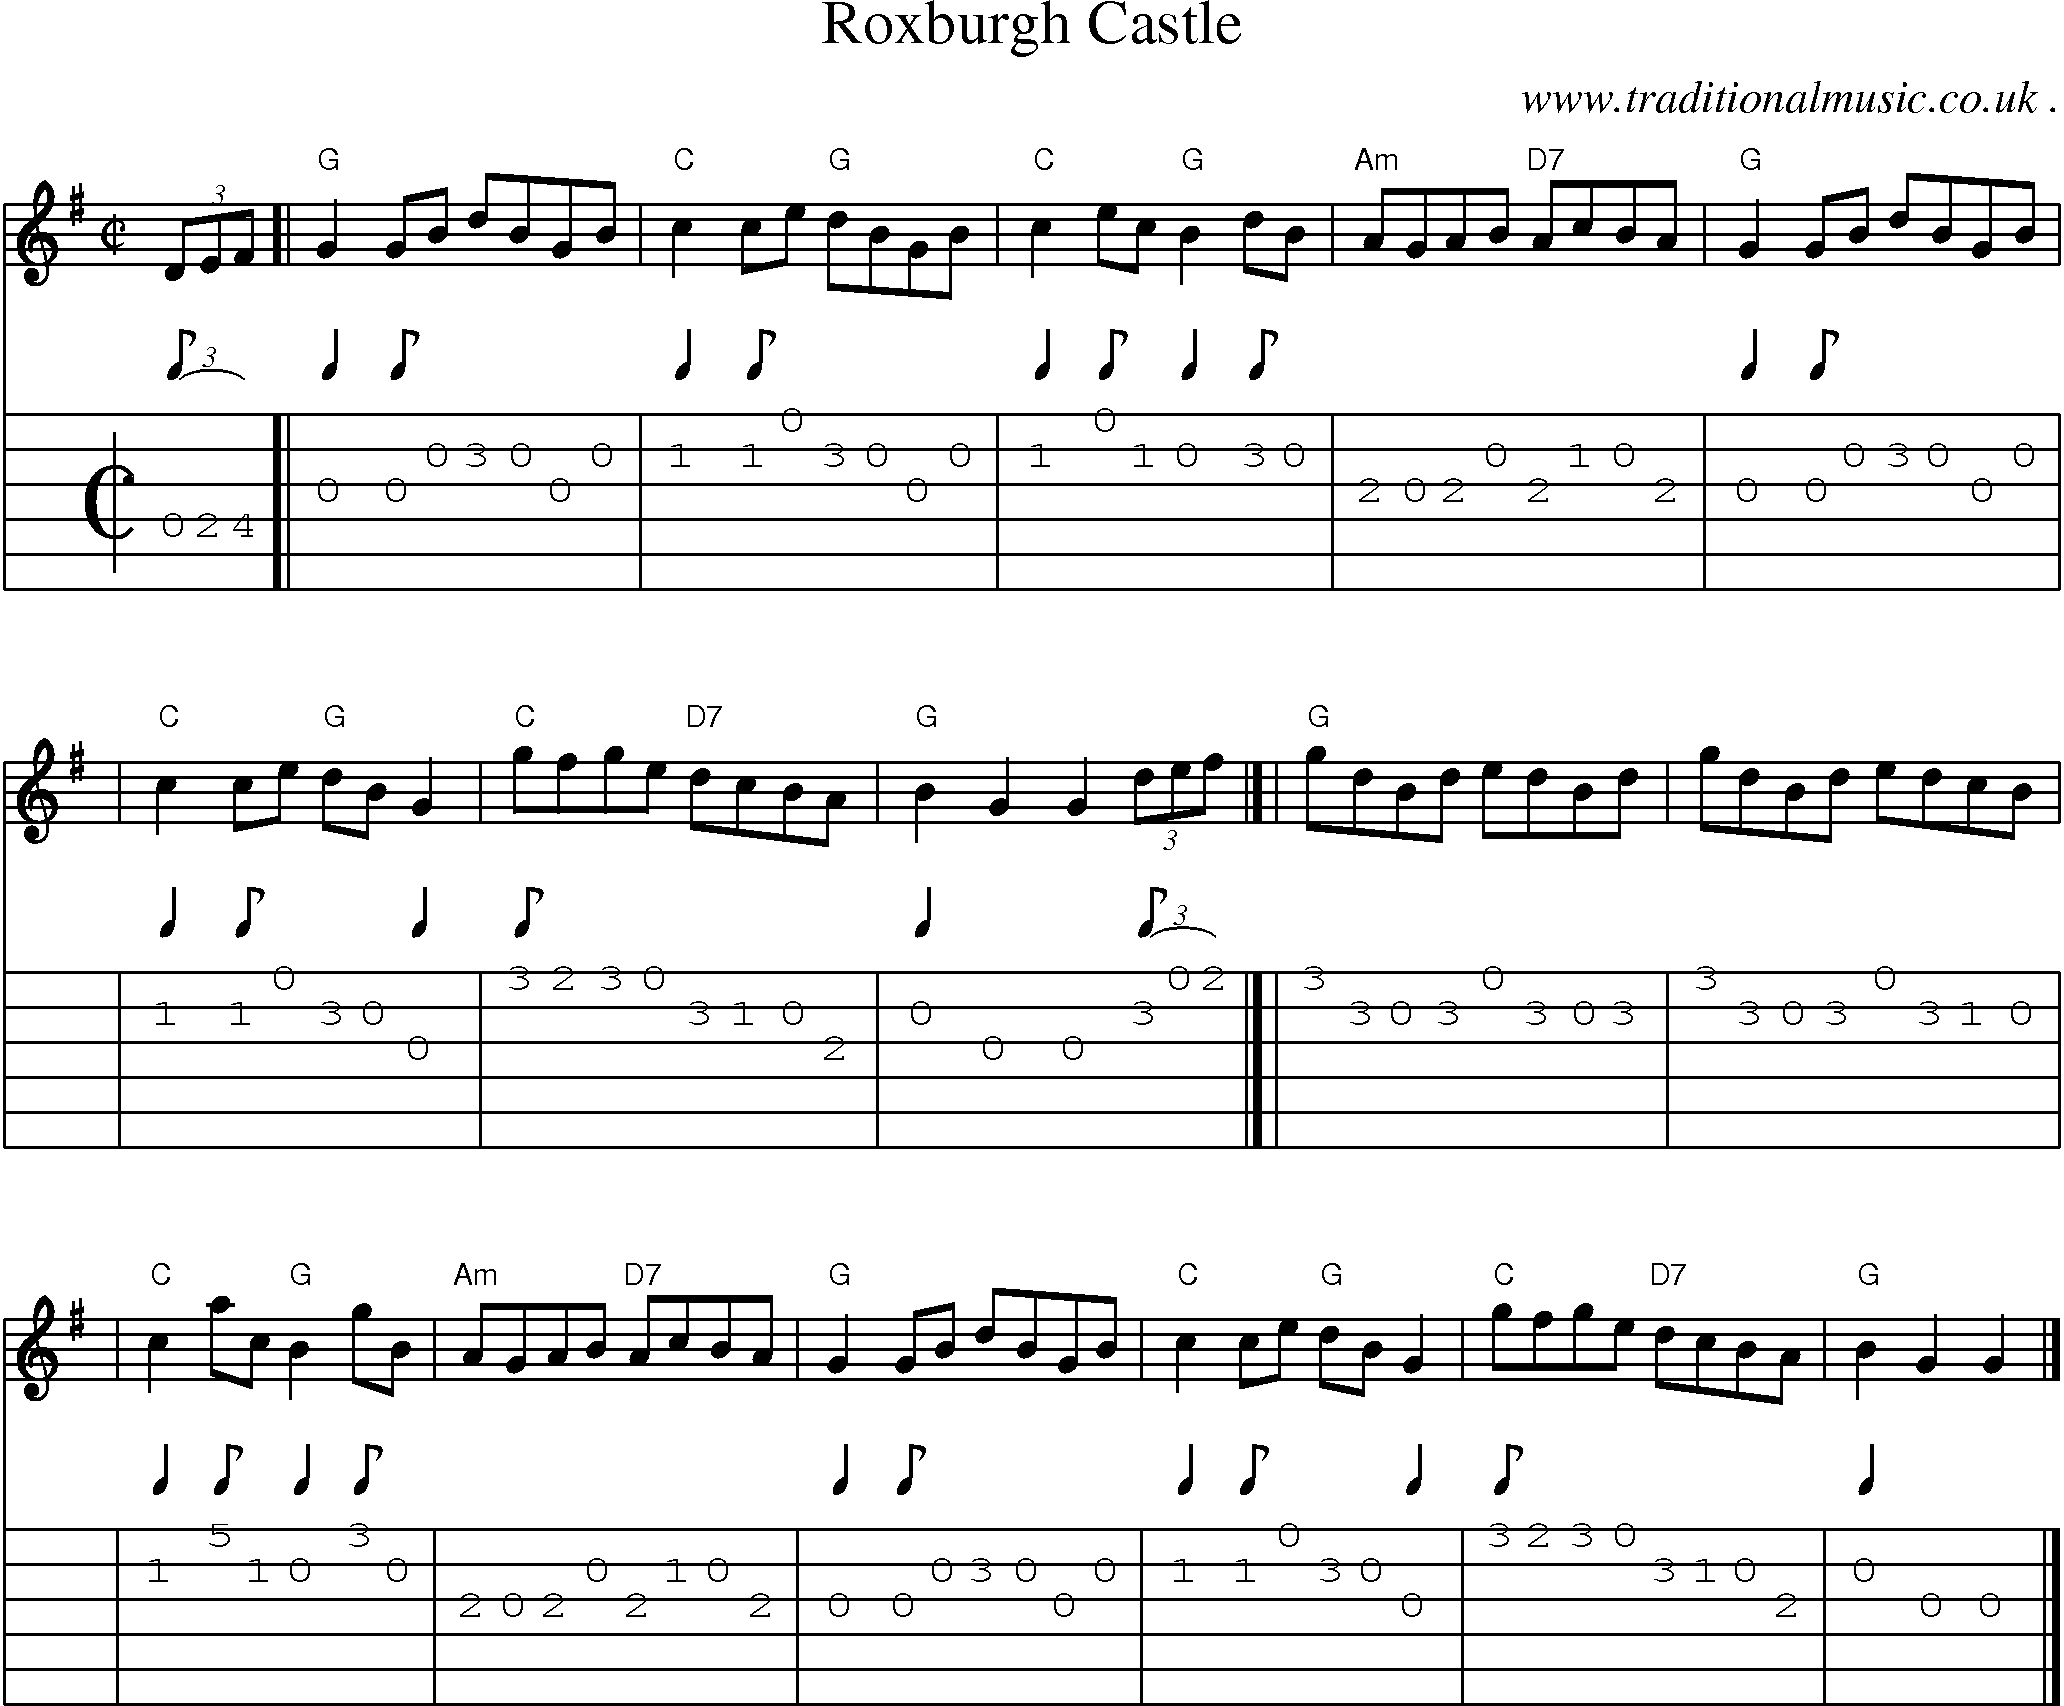 Sheet-music  score, Chords and Guitar Tabs for Roxburgh Castle